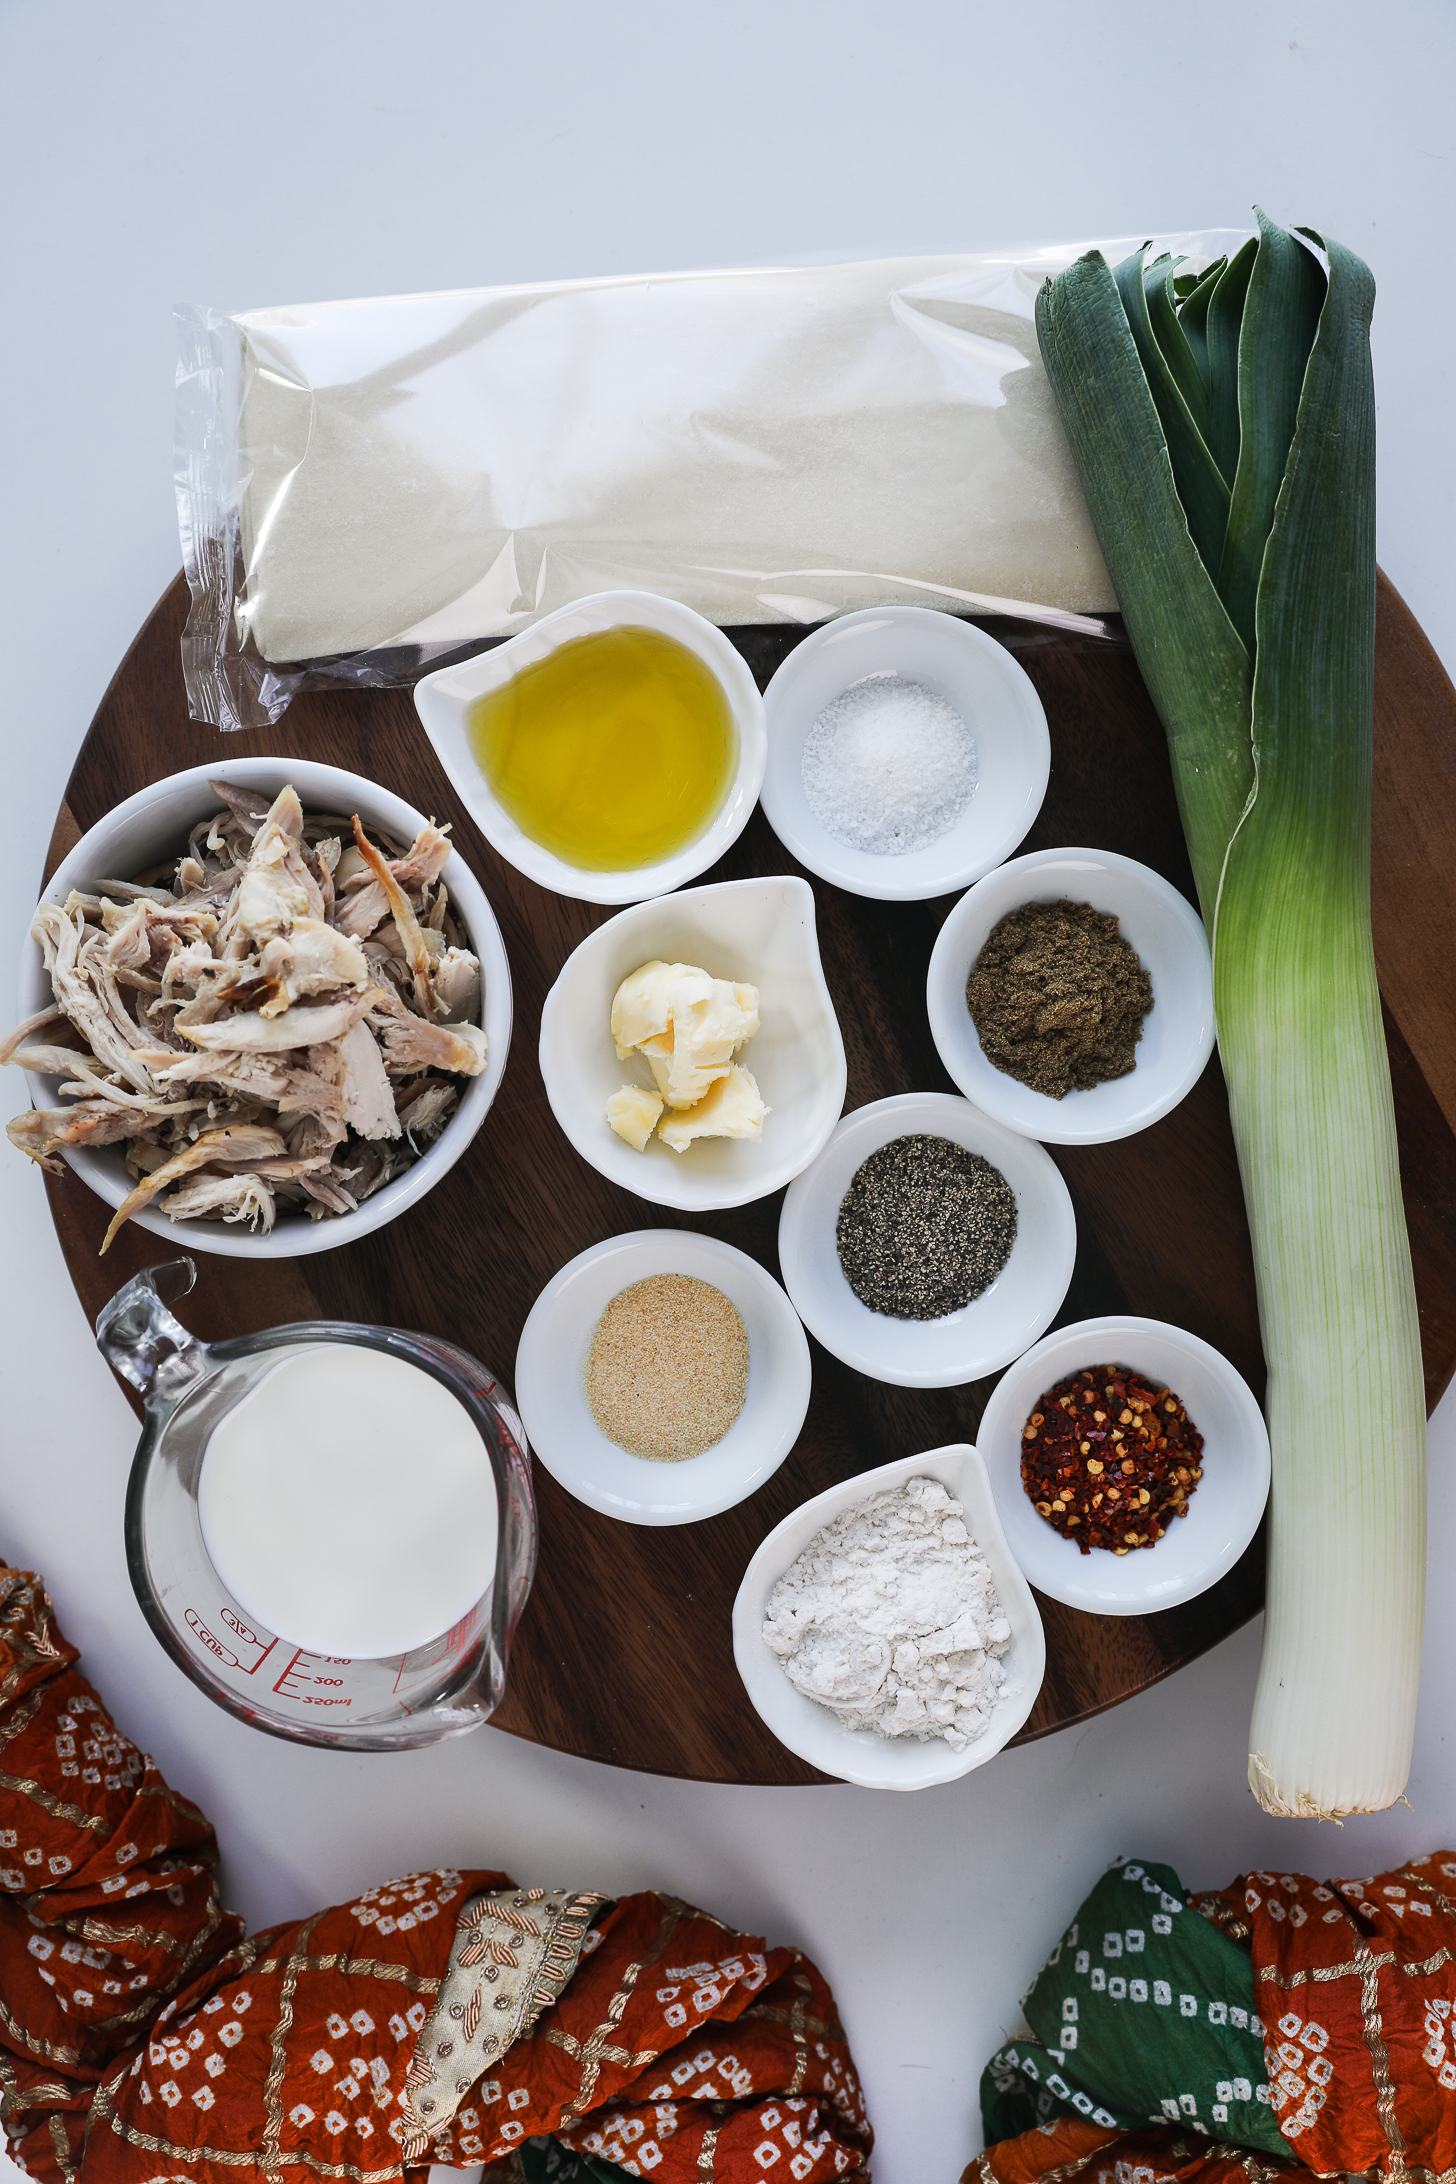 A collection of food ingredients including shredded chicken, leek, folded puff pastry, milk, flour and spices on a round board.